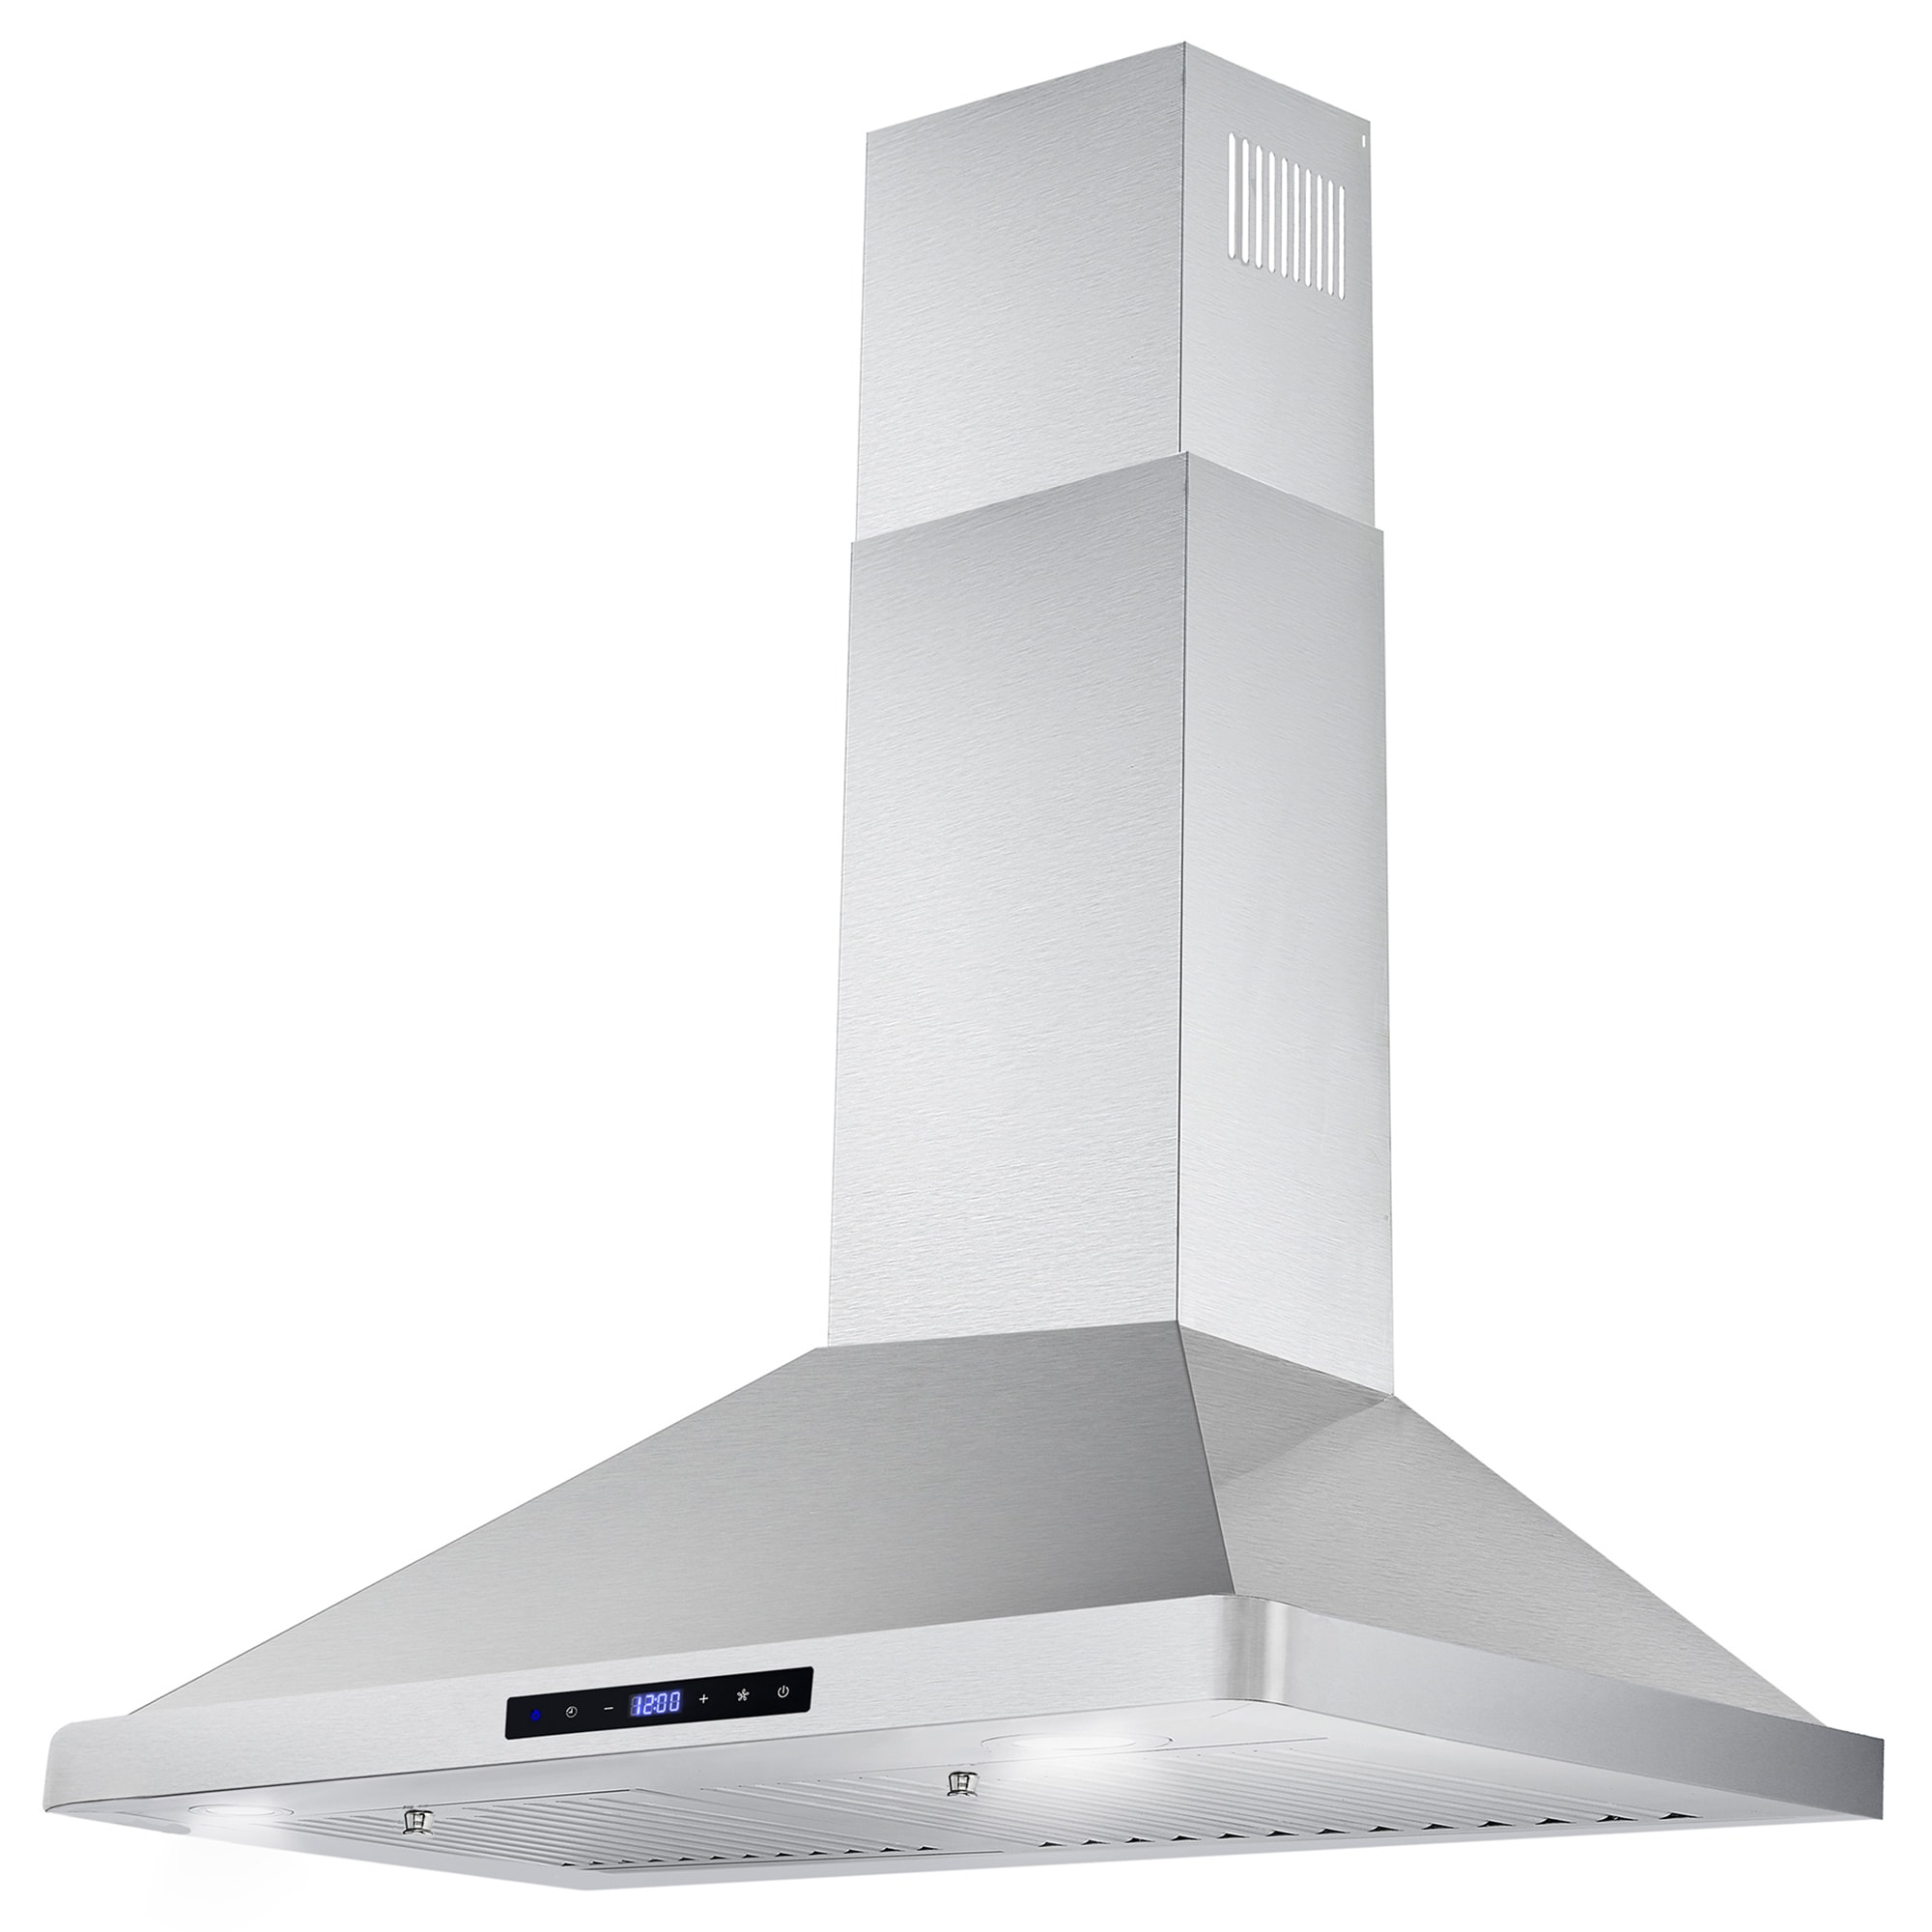 Wall Mount Kitchen Hood 30 inch, Ducted/Ductless Range Hood with Delayed  Shutdown Function, 3 Speed Fan, Energy Efficient LED Light, Soft Touch